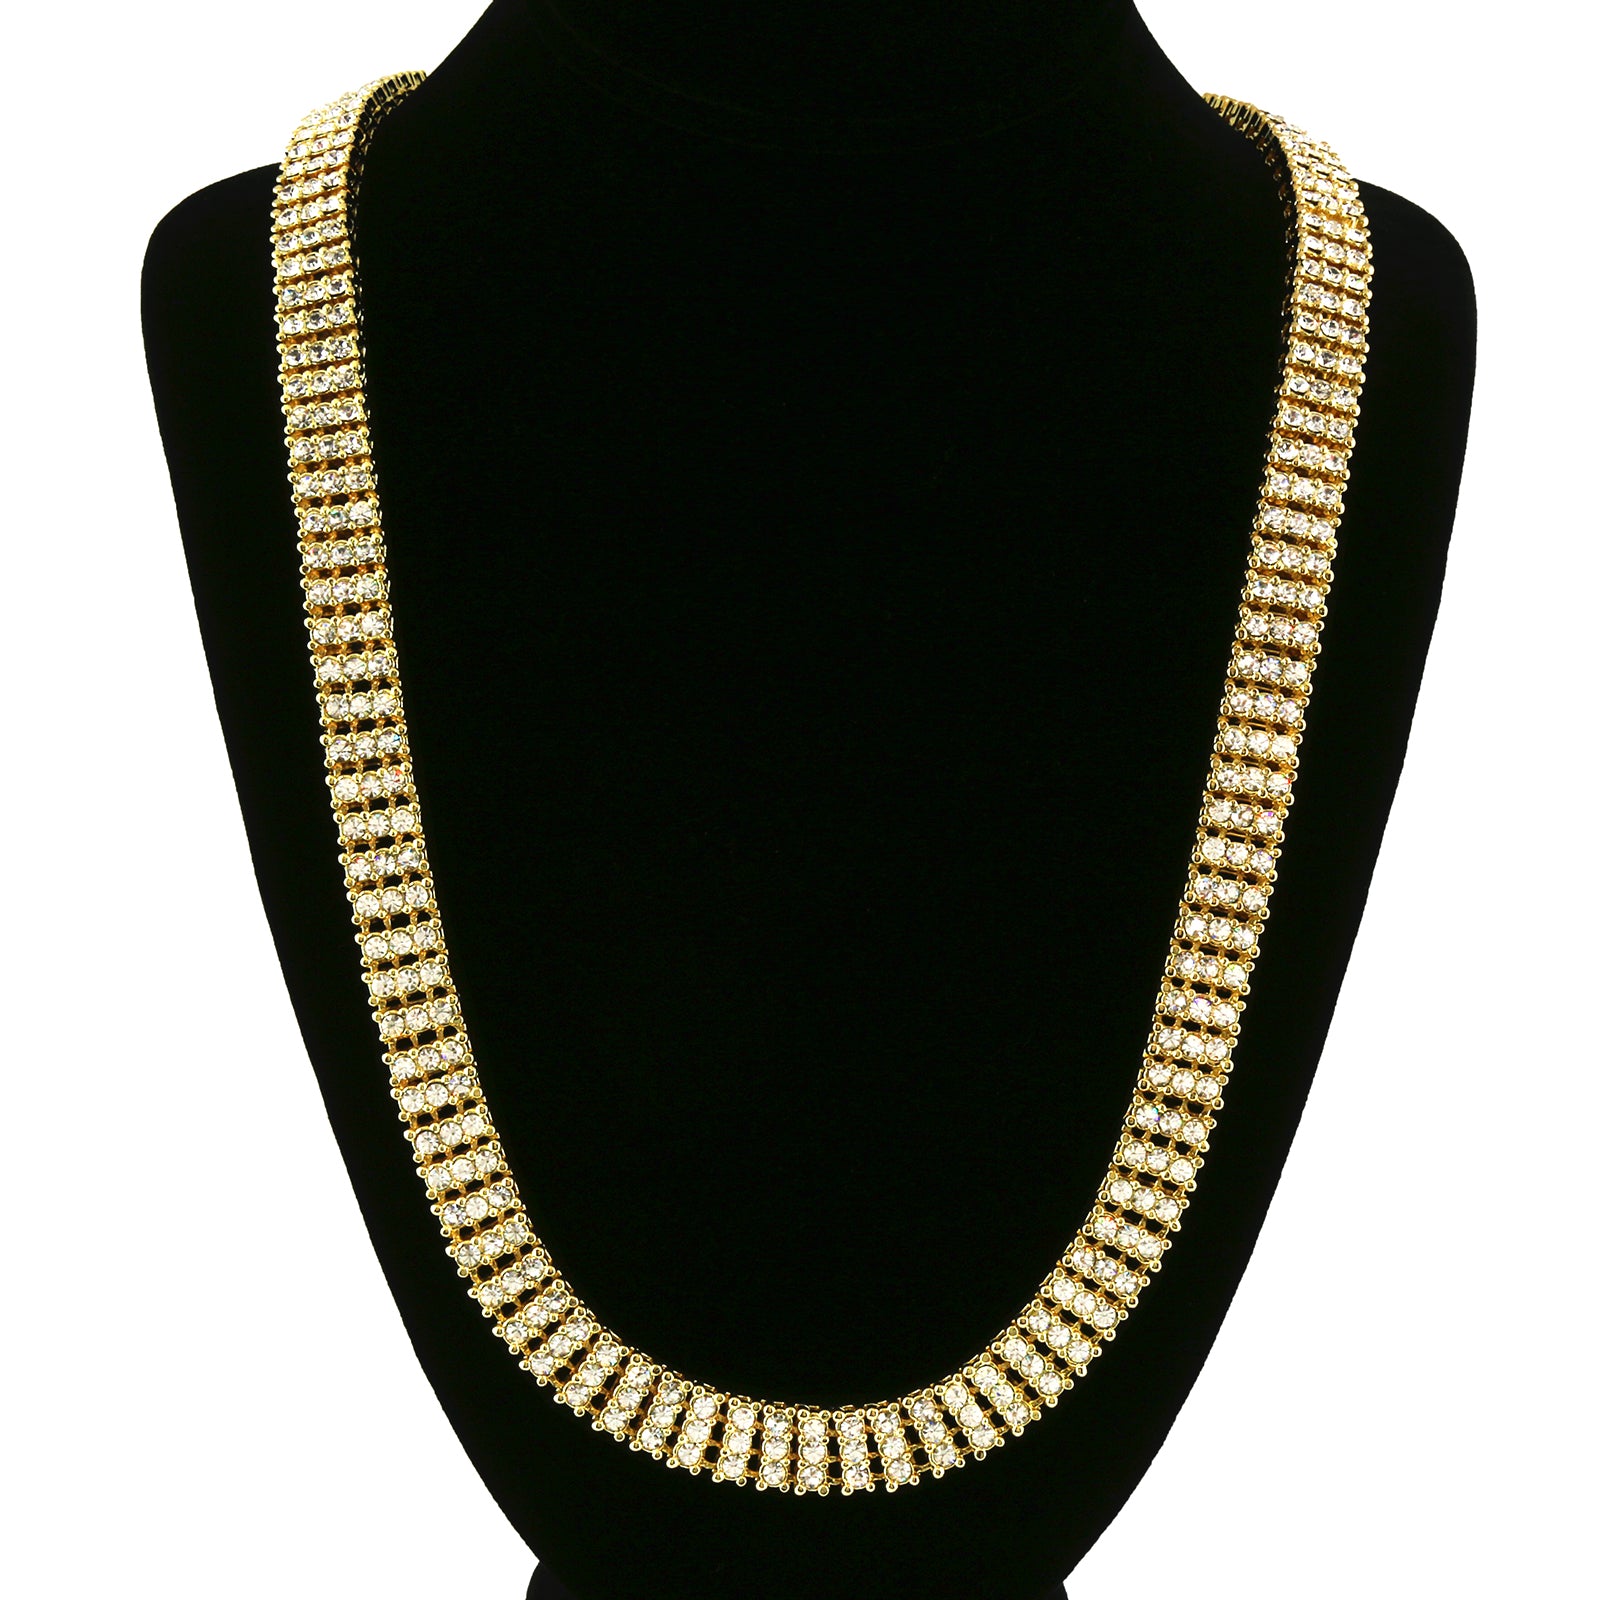 3 ROW ICED-OUT TENNIS GOLD/CLEAR CHAIN 30"